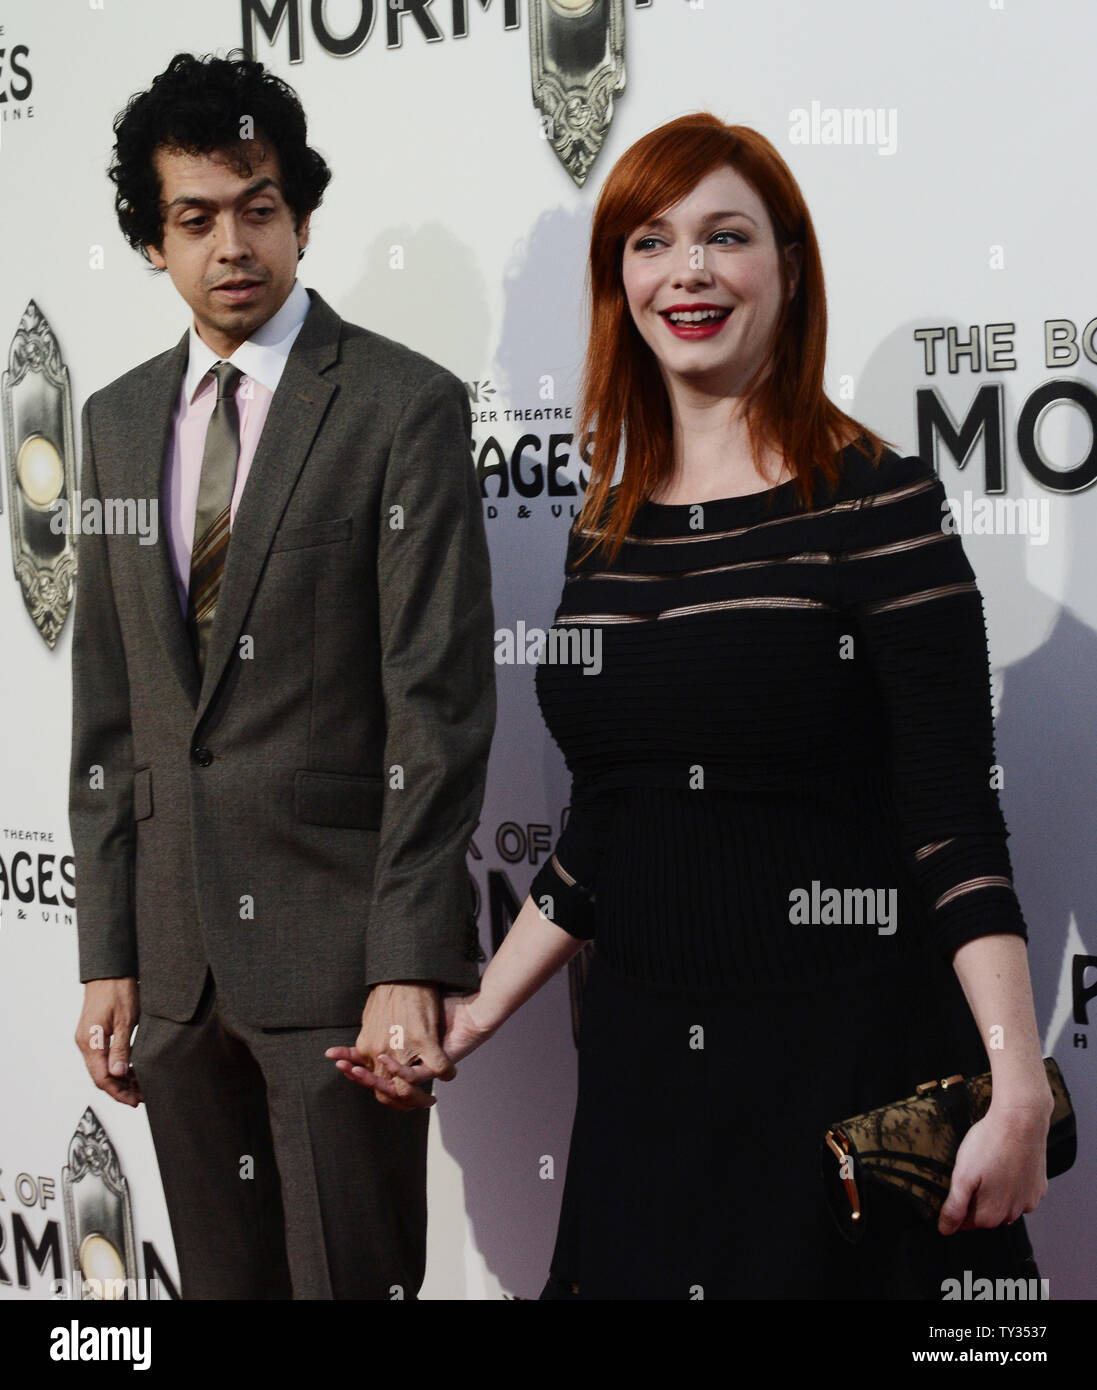 Christina Hendricks And Her Husband Geoffrey Arend Attend The Premiere Of The Book Of Mormon